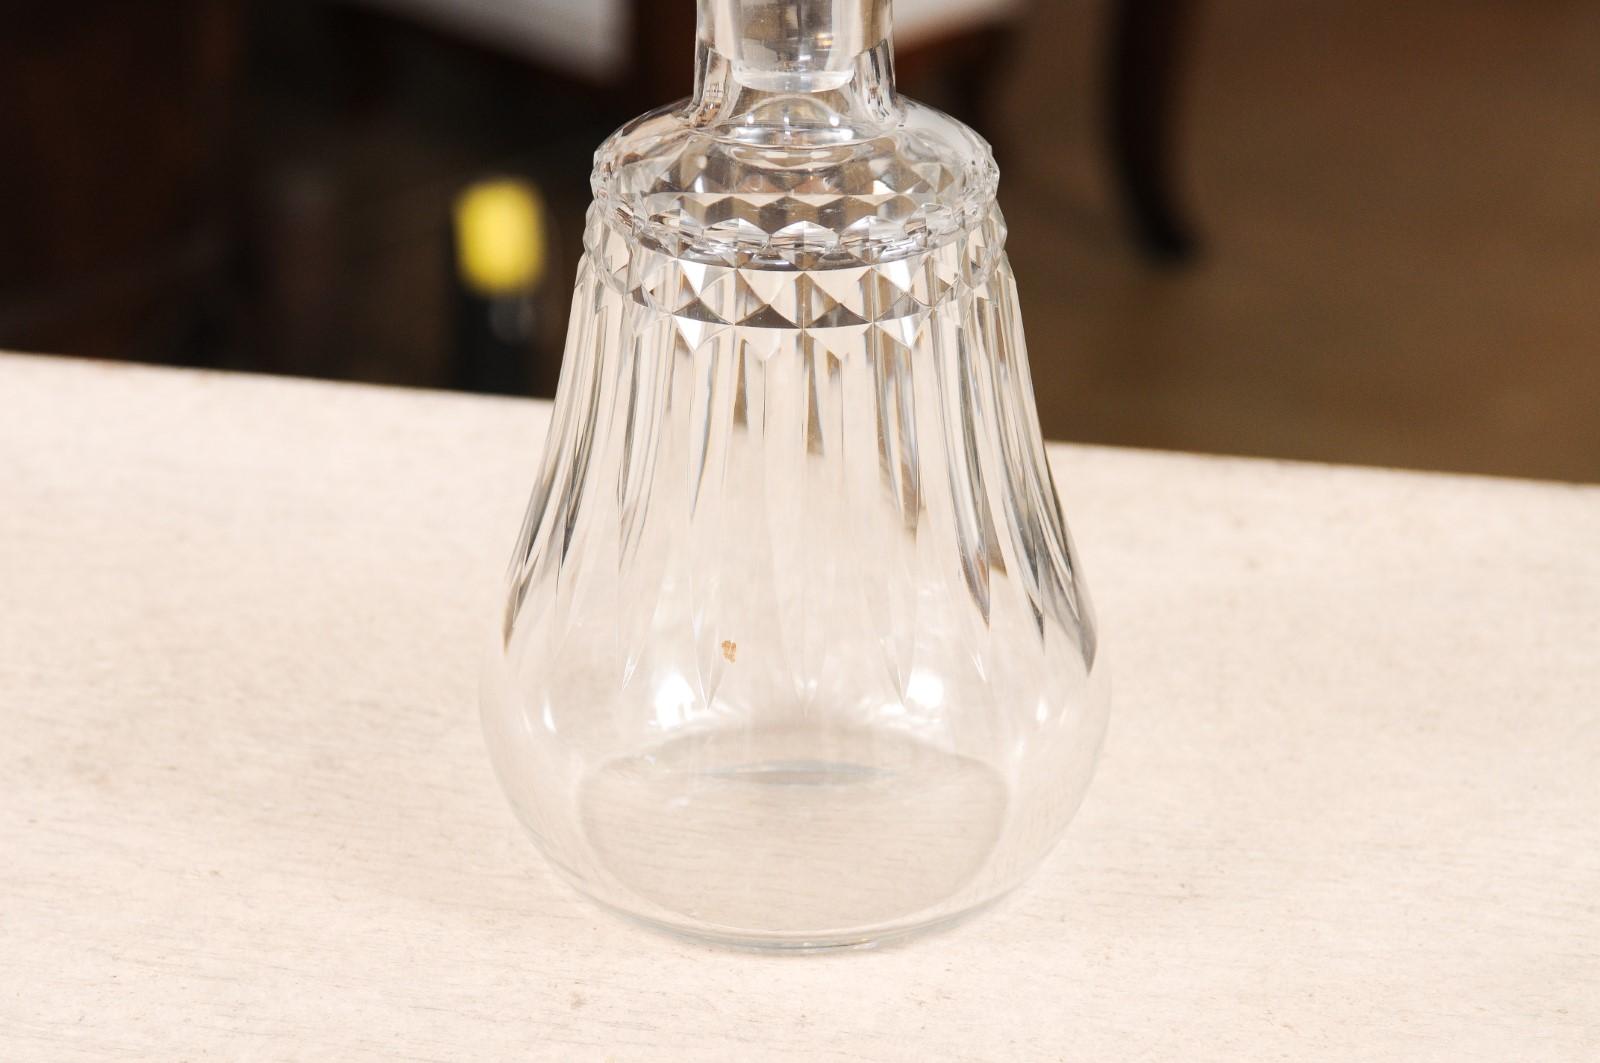 French Baccarat Crystal 1940s Pear Shaped Decanter with Cutaway Motifs For Sale 1